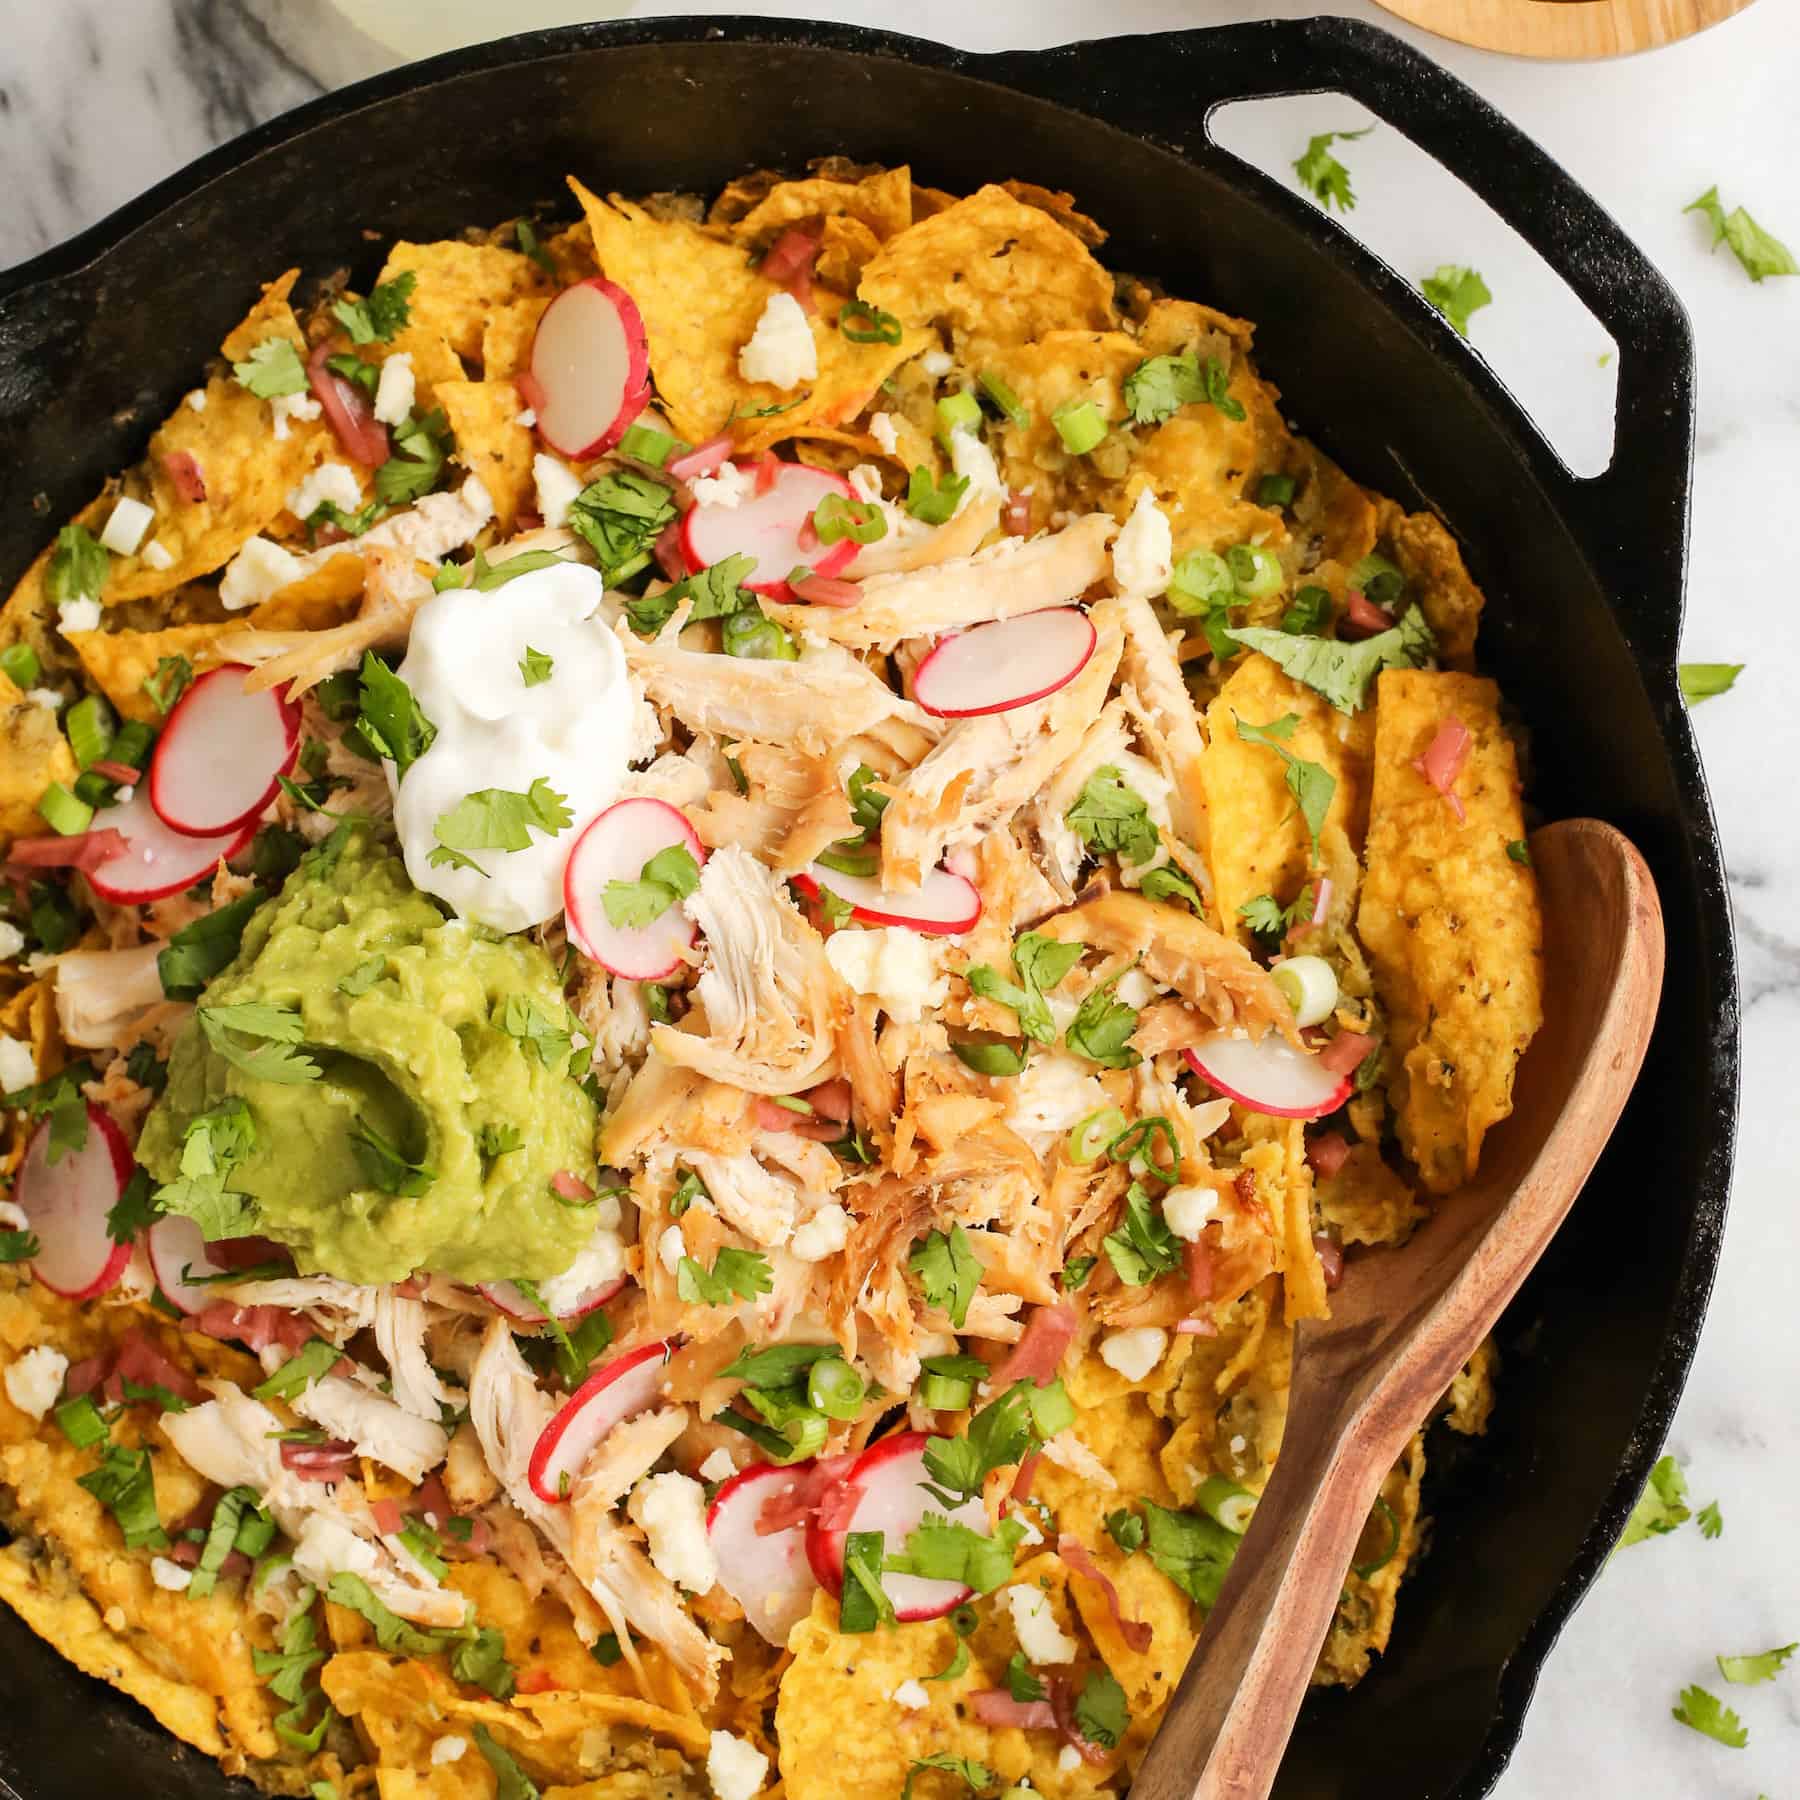 Skillet chicken chilaquiles topped with radishes and guacamole